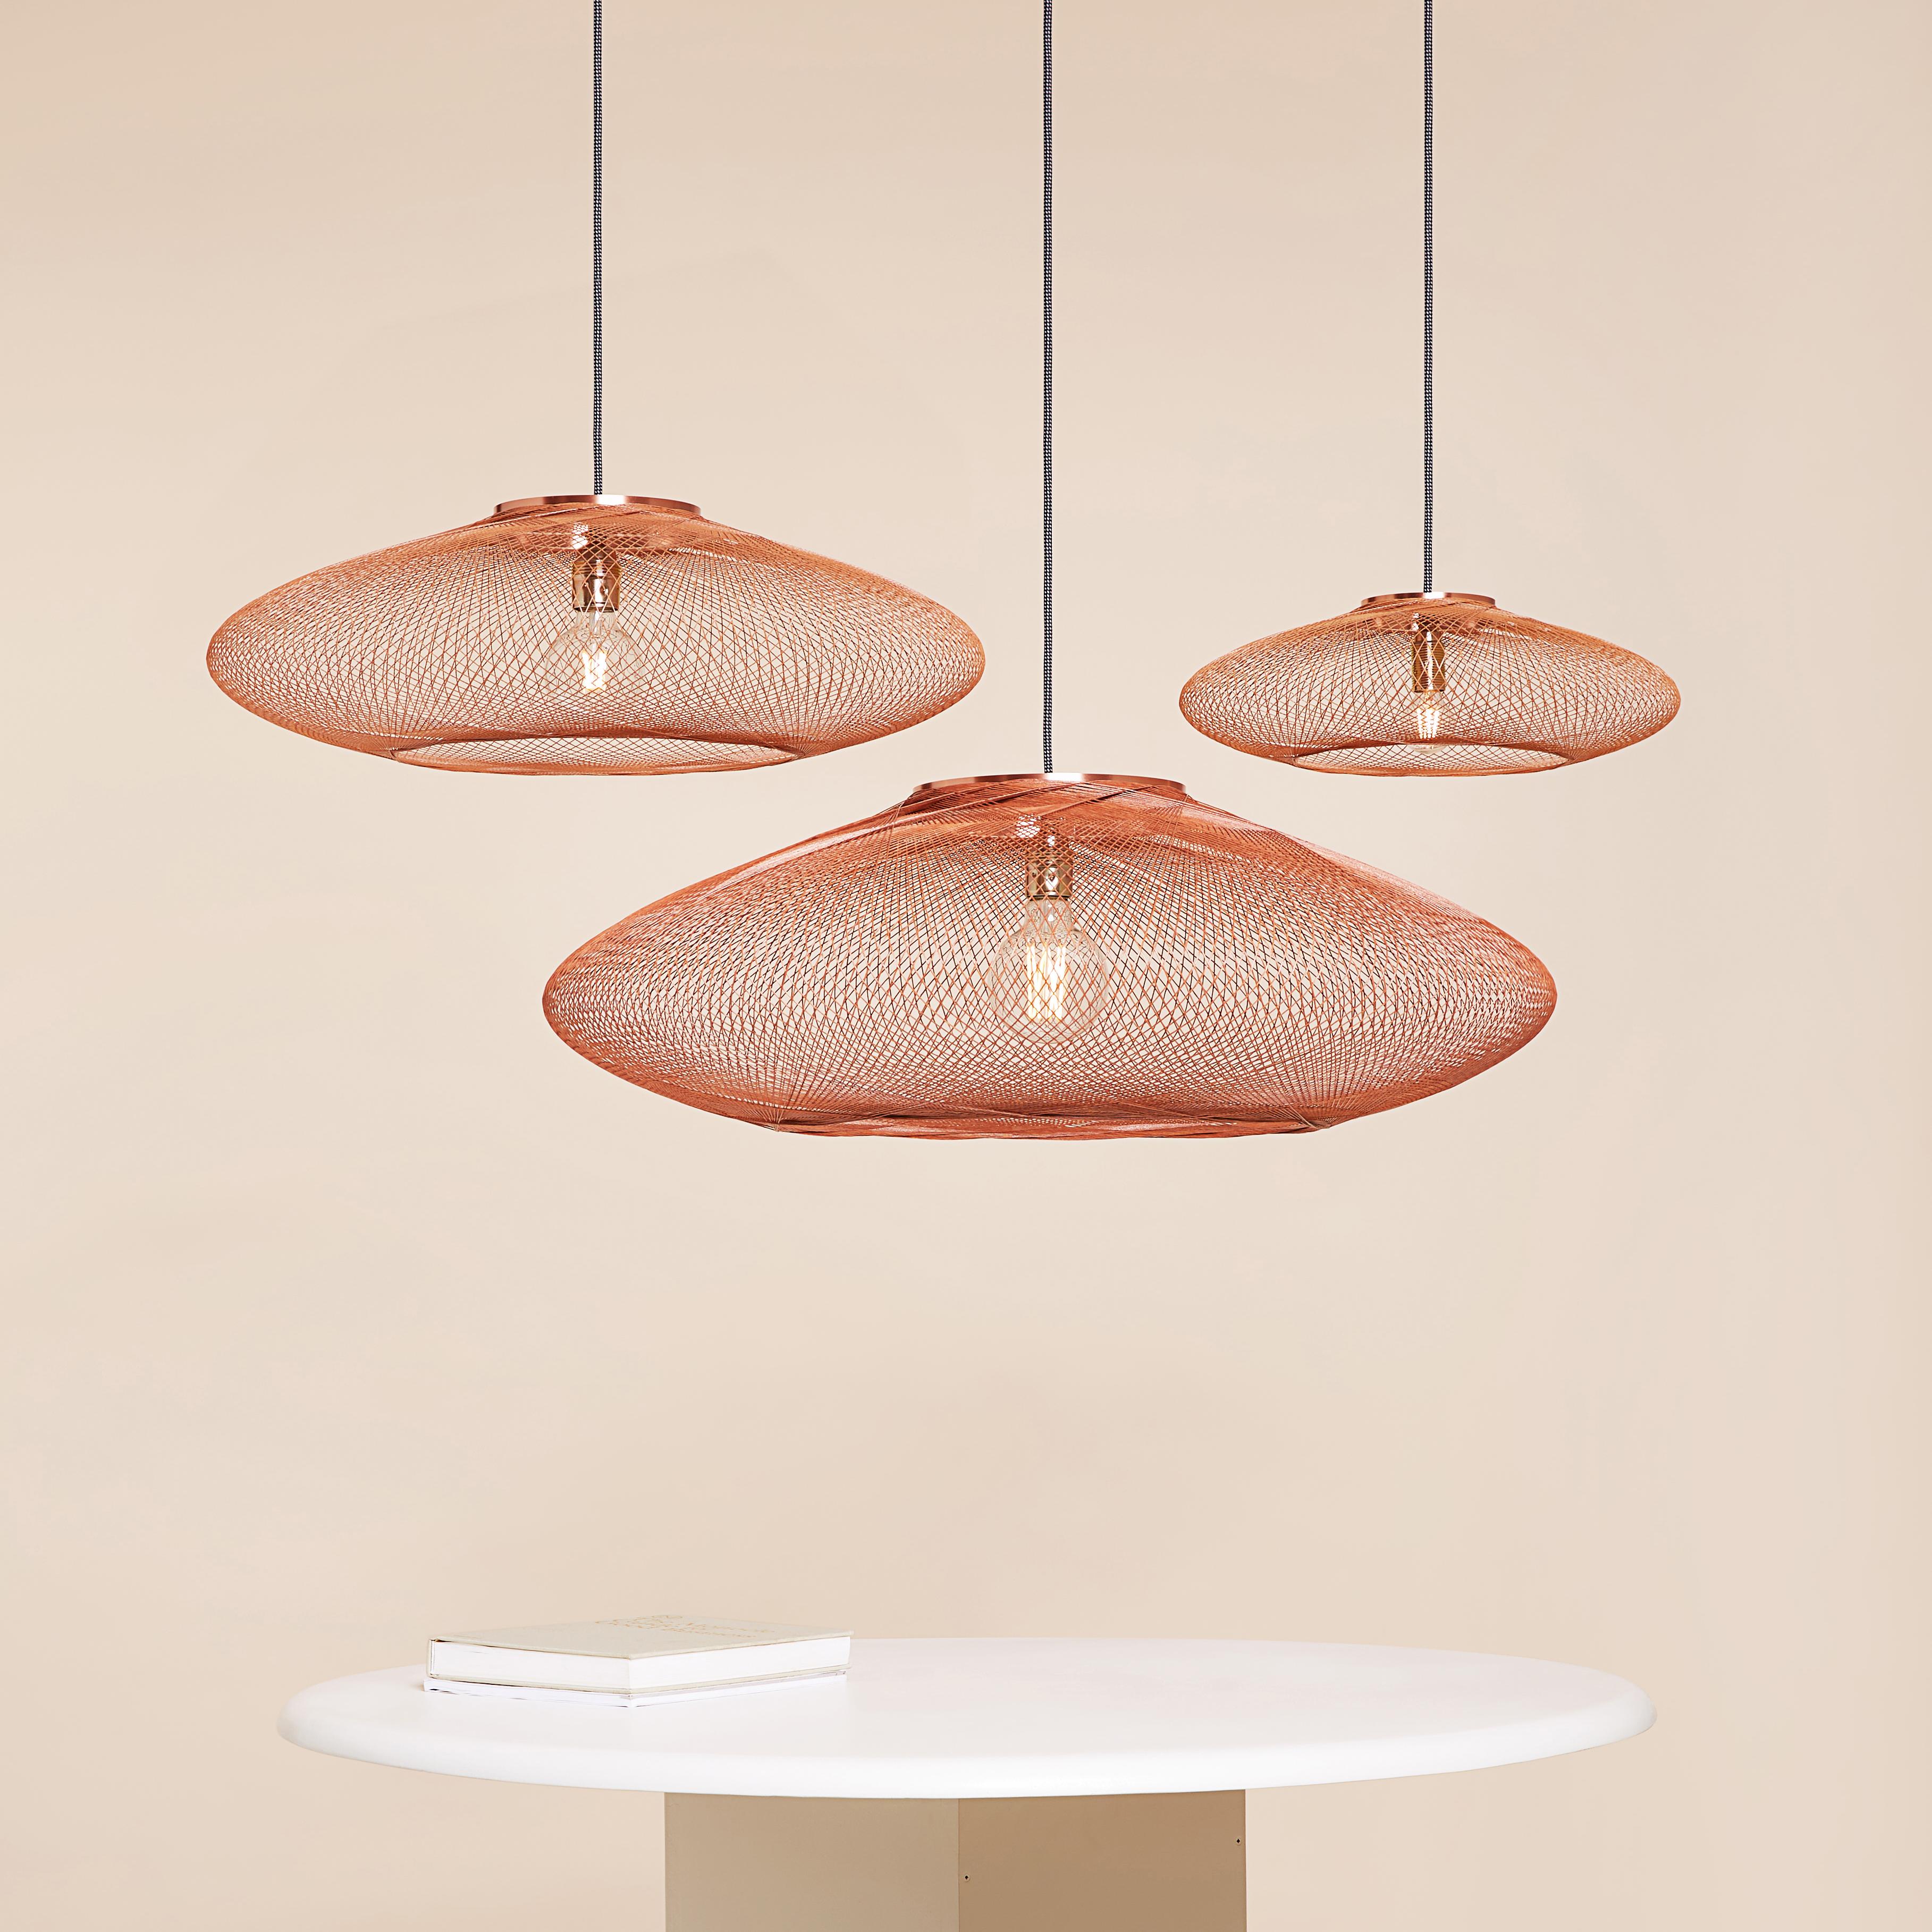 Large copper UFO pendant lamp by Atelier Robotiq
Dimensions: D 80 x H 24 cm
Materials: Resin-impregnated industrial fiber, brass.
Available with holder in copper/ brass/ black coated stainless steel.
Available in different colors, 3 sizes, and